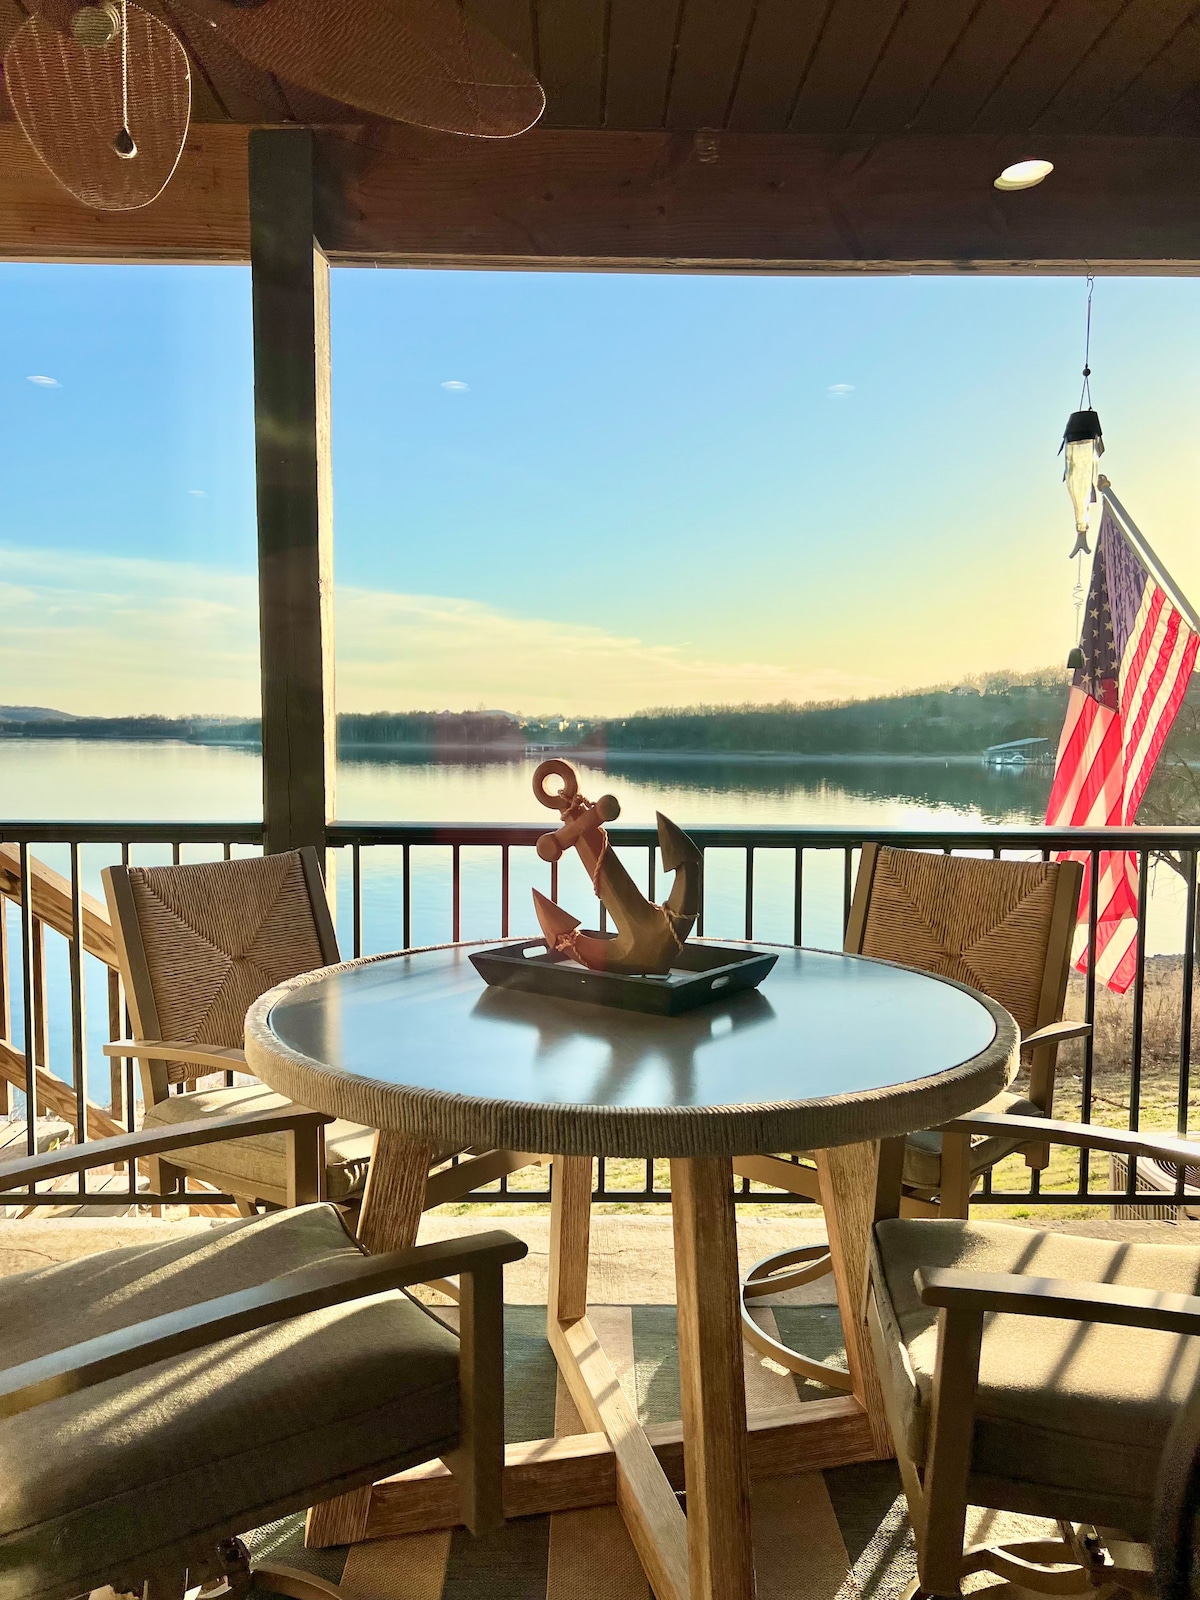 Rosies Place at Table Rock Lake